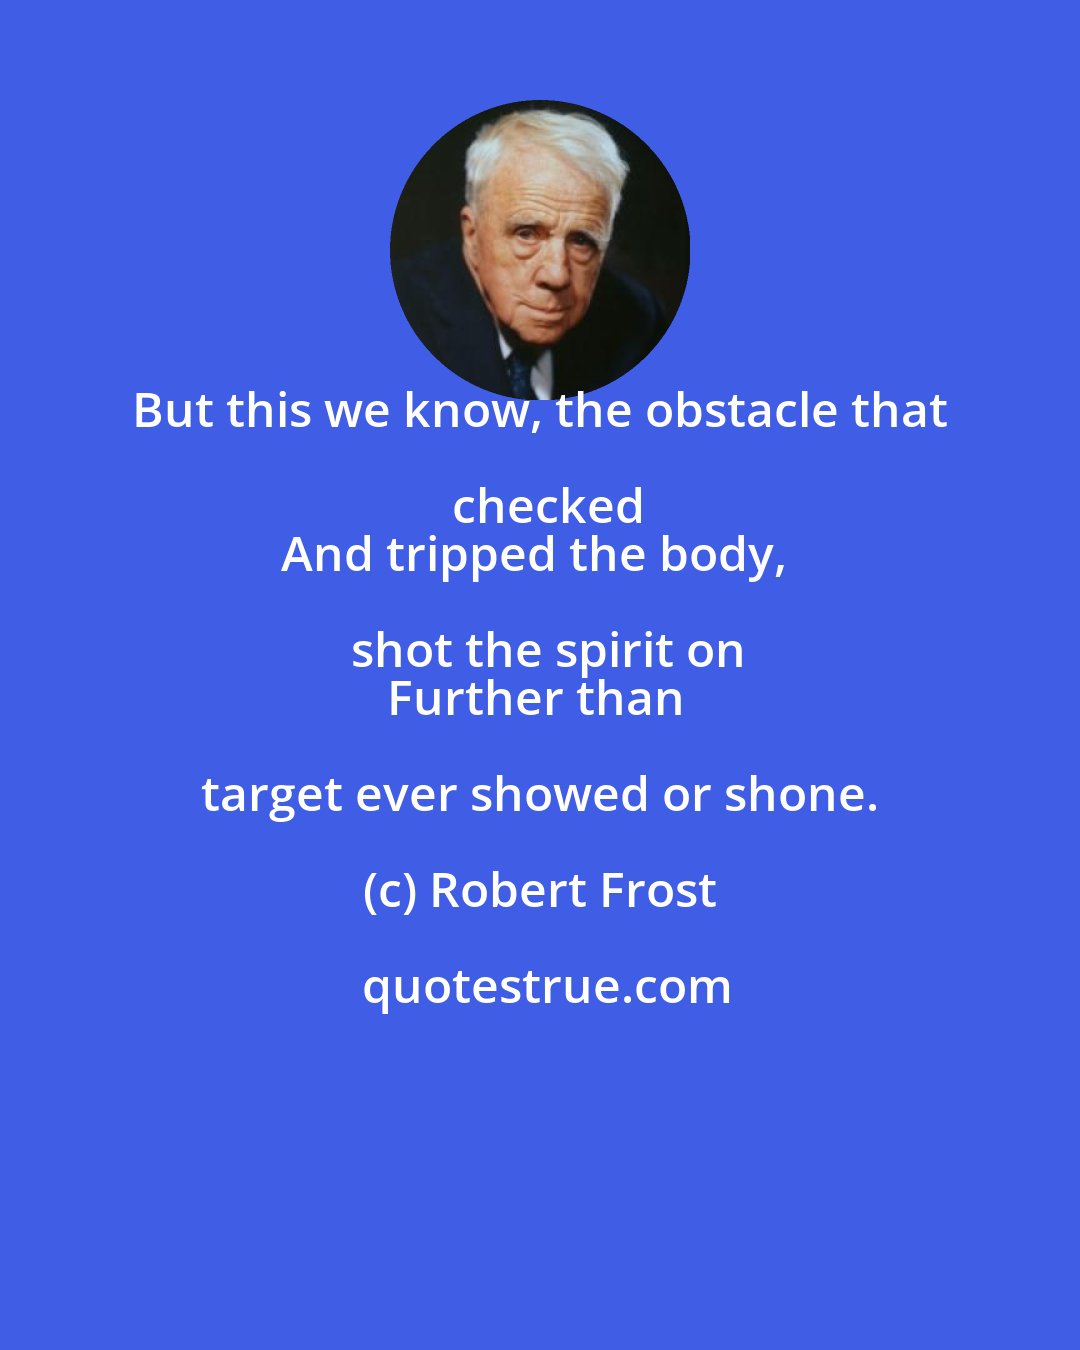 Robert Frost: But this we know, the obstacle that checked
And tripped the body, shot the spirit on
Further than target ever showed or shone.